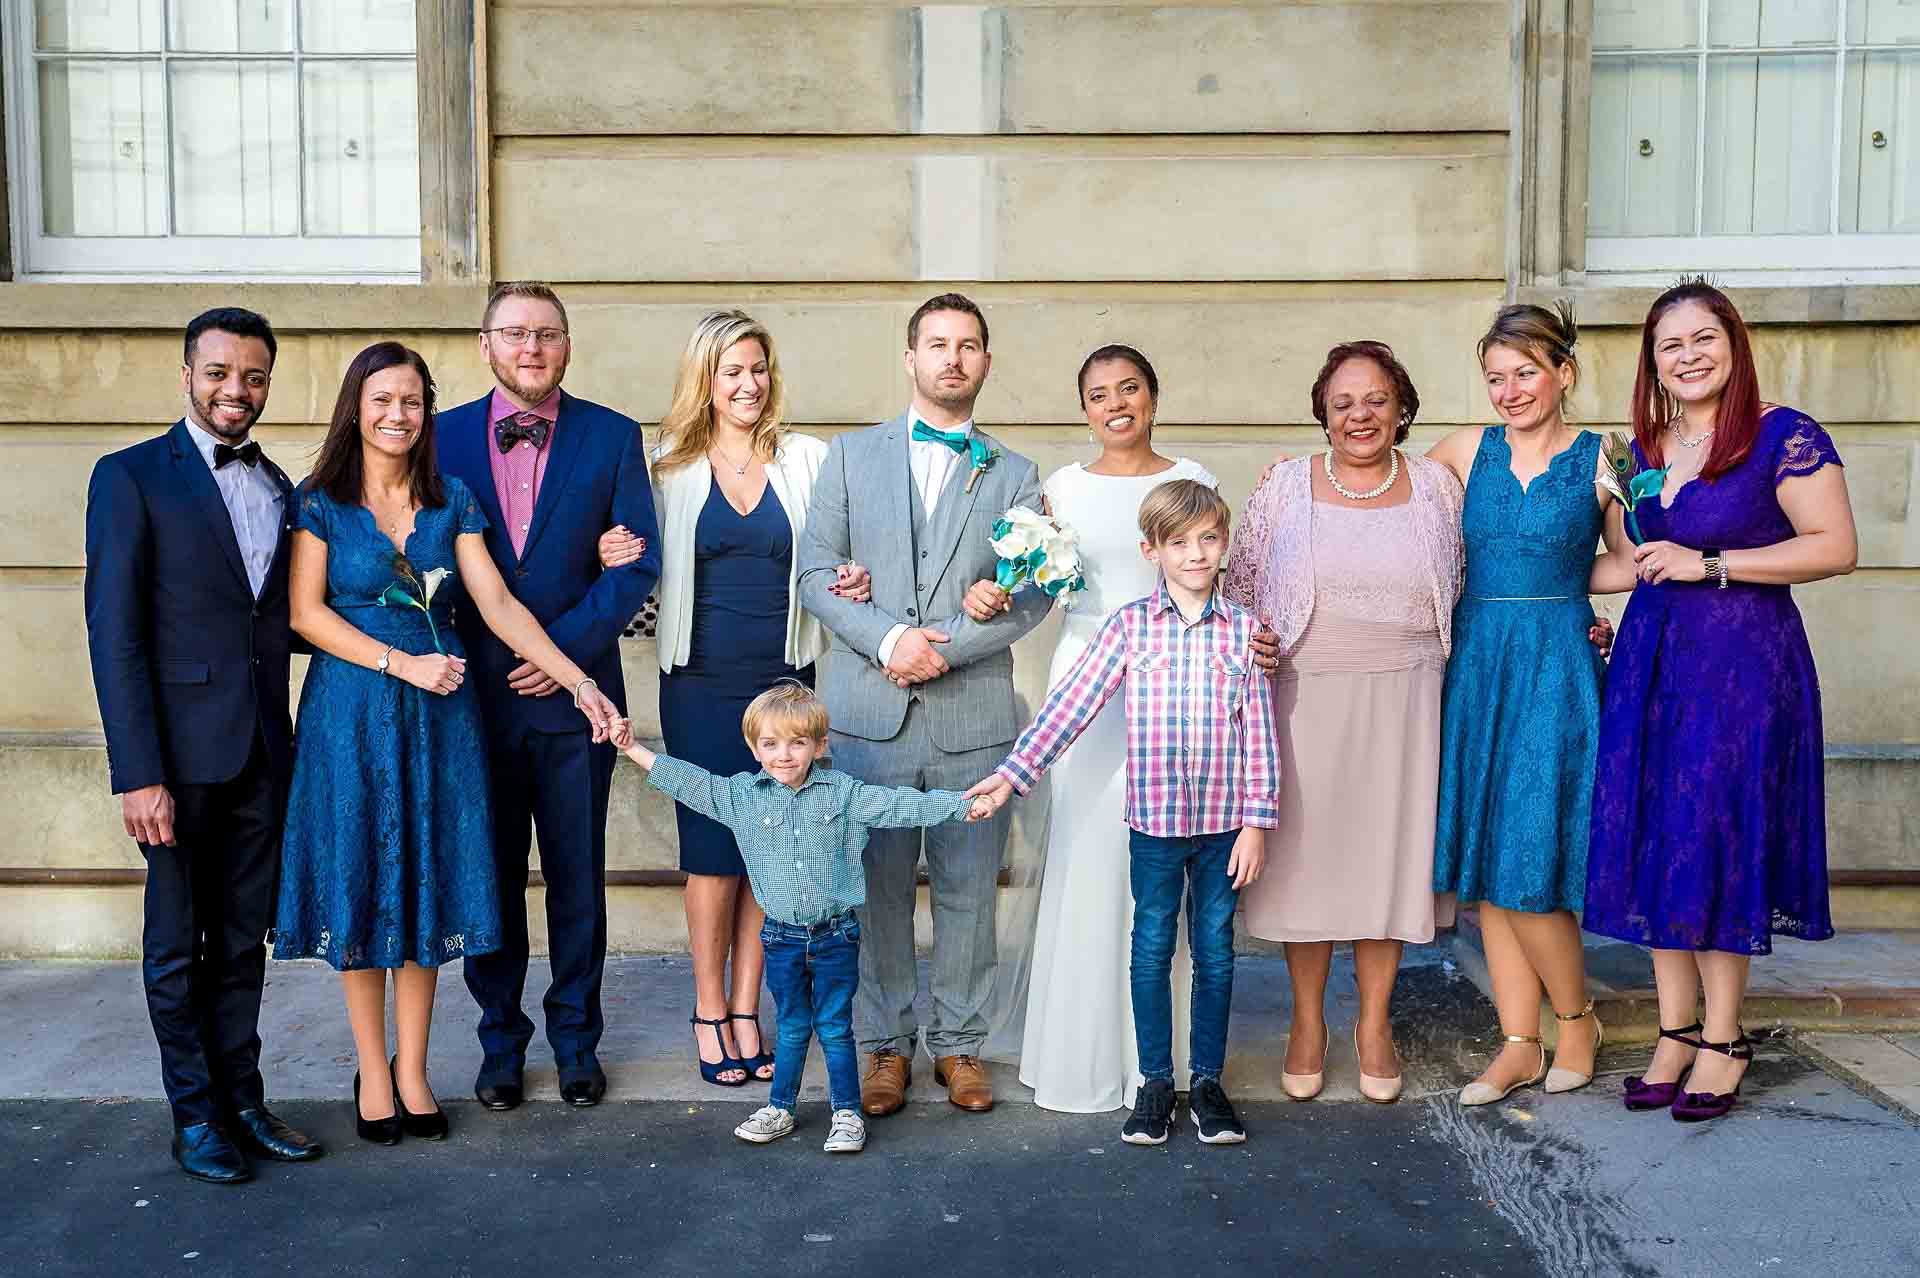 Group Photo of Wedding Guests